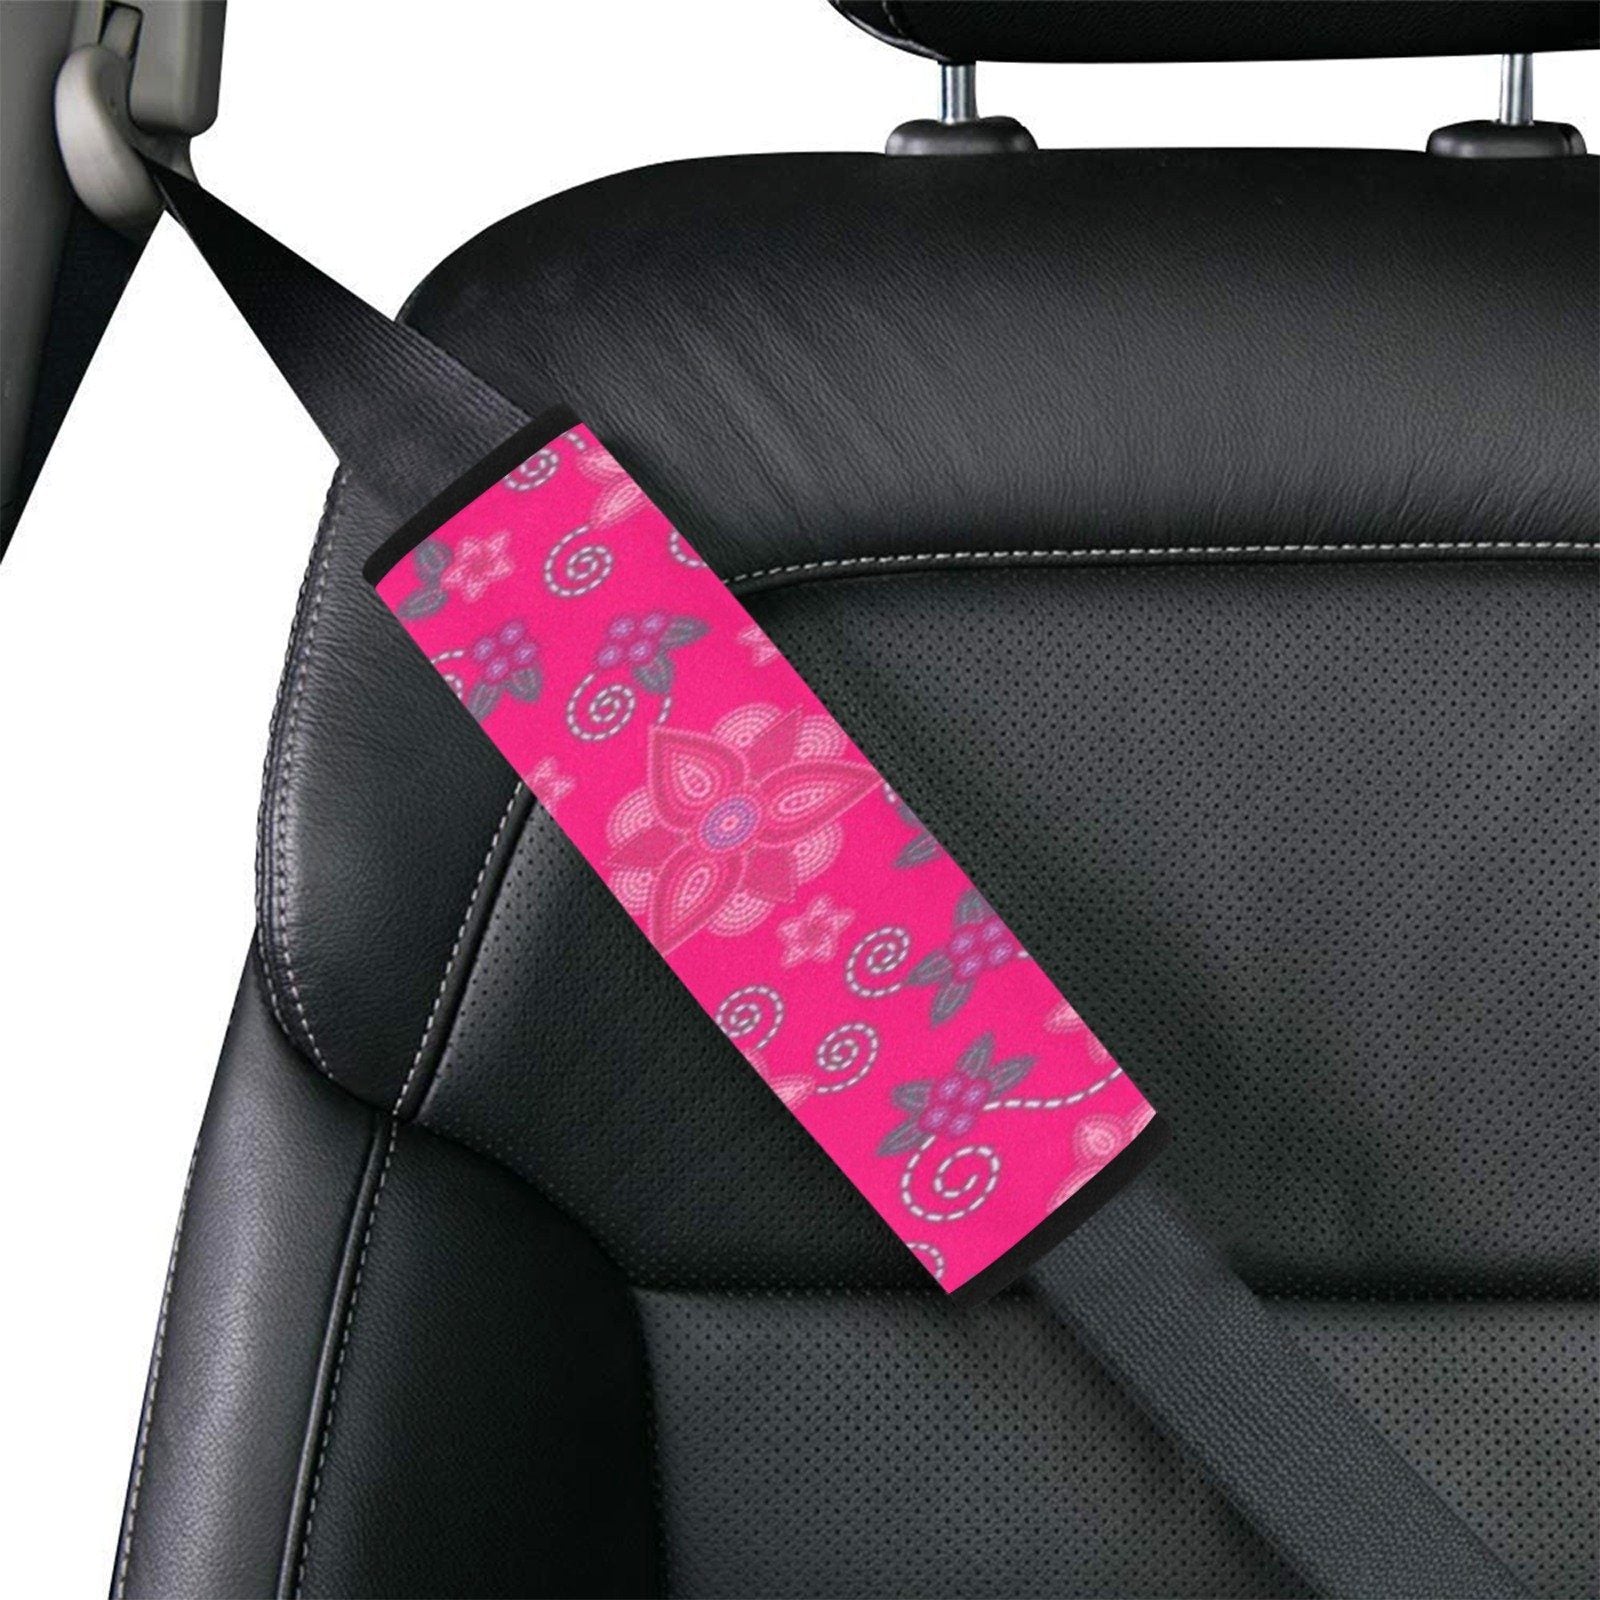 Berry Picking Pink Car Seat Belt Cover 7''x12.6'' (Pack of 2) Car Seat Belt Cover 7x12.6 (Pack of 2) e-joyer 